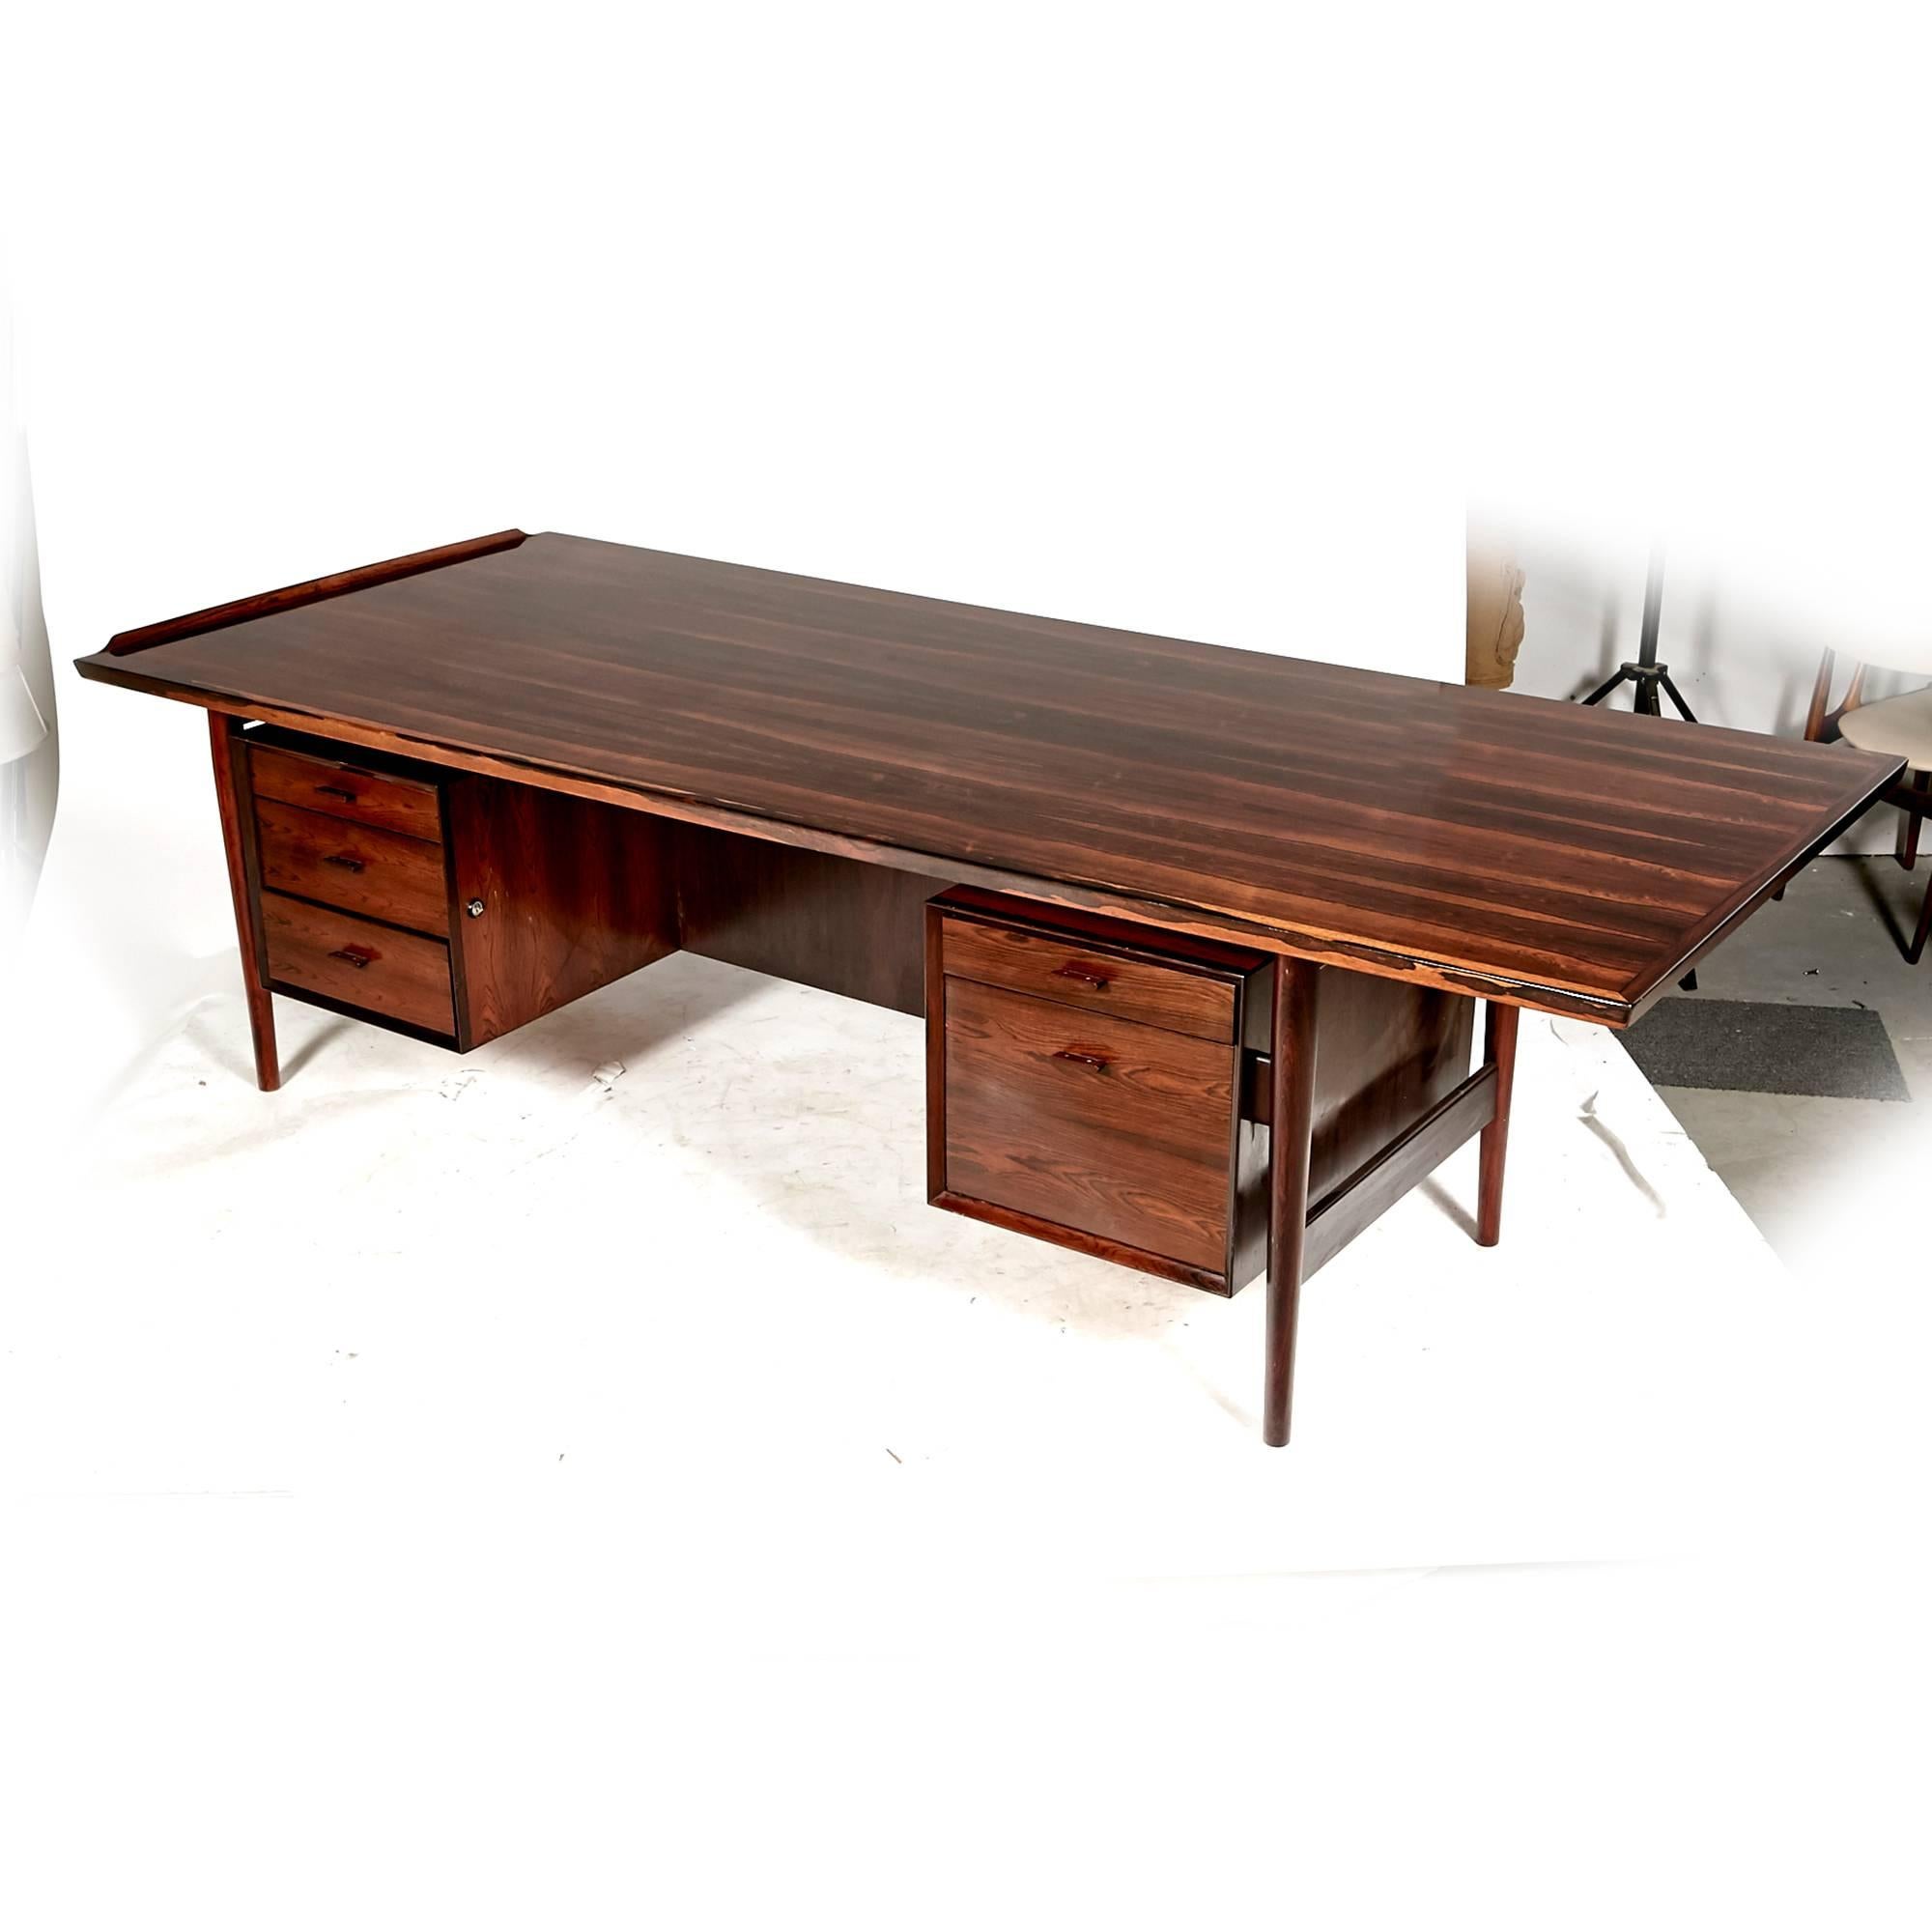 Vintage rare Danish rosewood 8ft Executive desk designed by Arne Vodder for Sibast Denmark, circa 1960s. The desk has five drawers with a curved lip on the sides. Drawers have original separators inside with rosewood drawer pulls and stainless steel